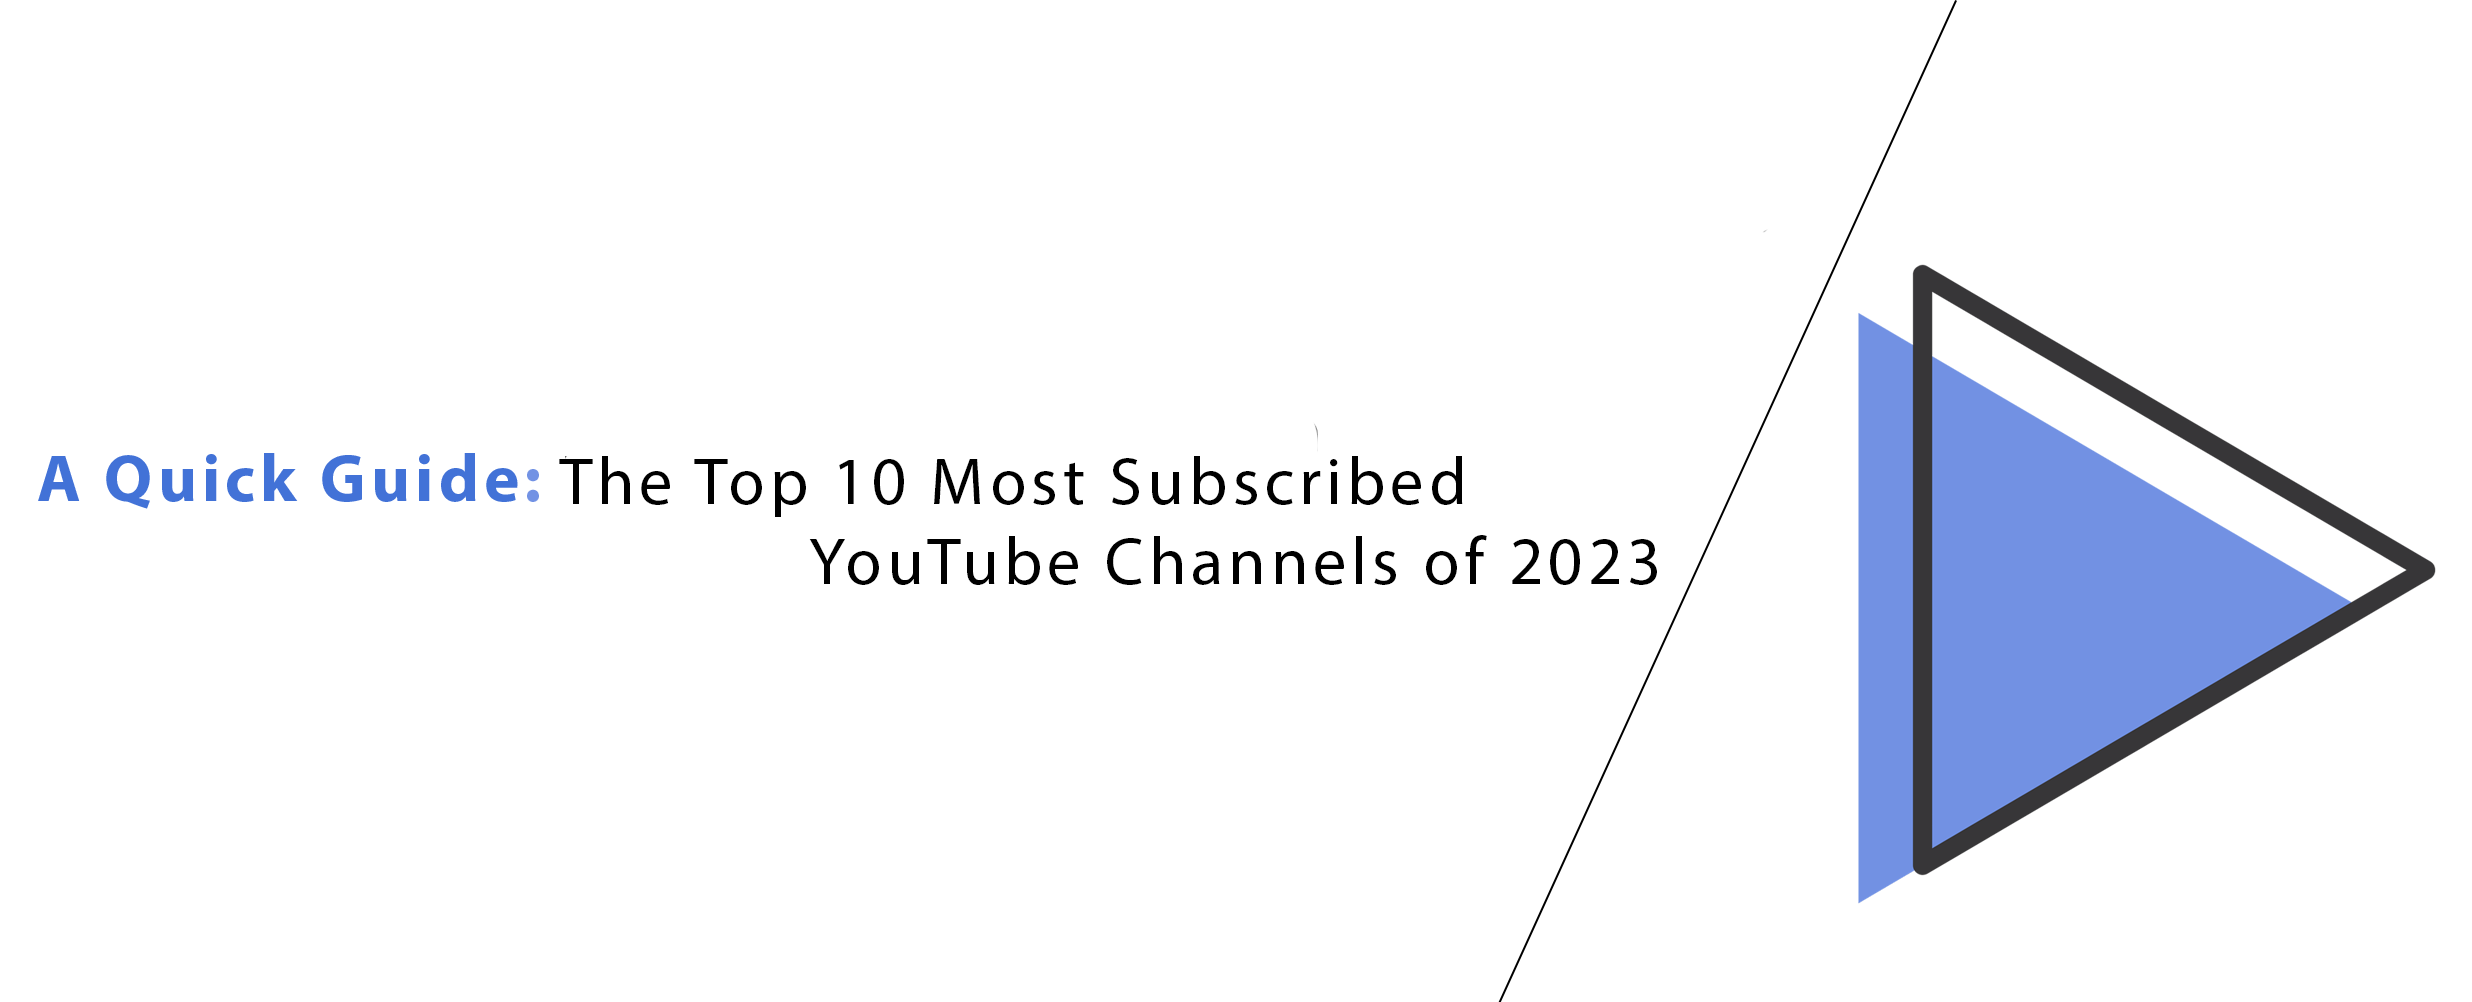 The Top 10 Most Subscribed YouTube Channels of 2023